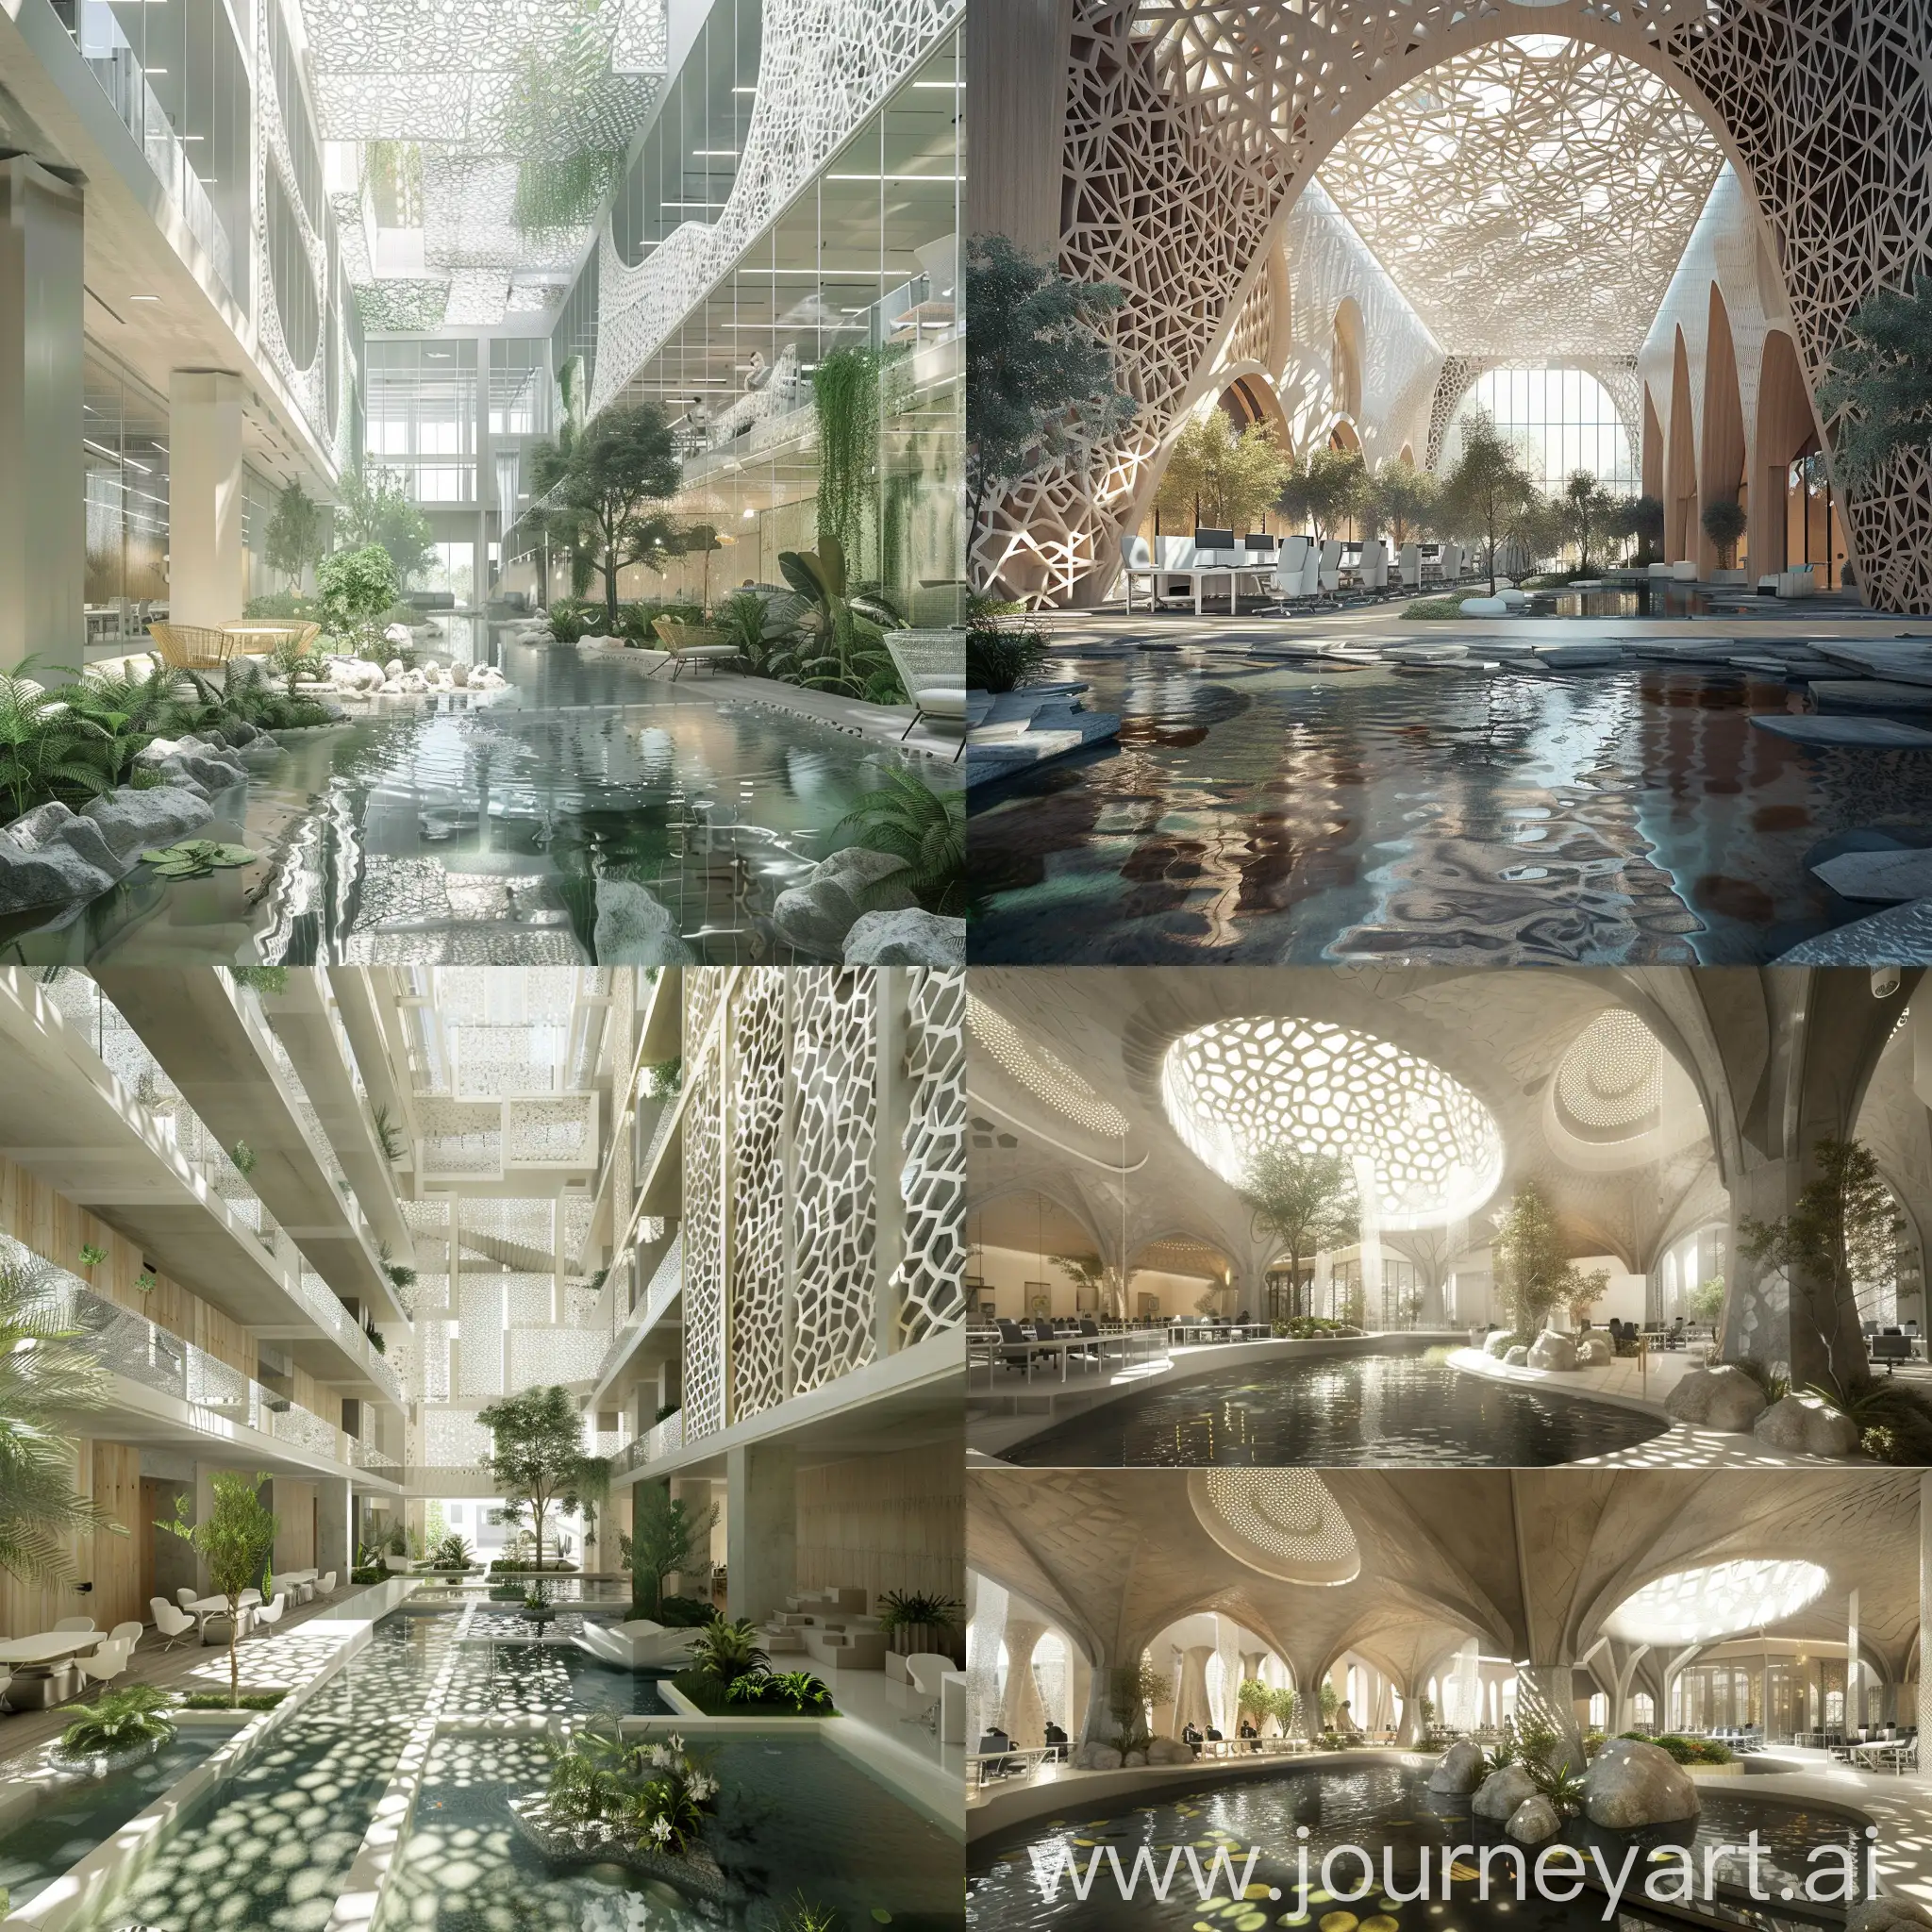 please generate an interior shots for an office building at Saudi Arabia inspired from a natural oasis, please focus on an internal atrium between the offices and meeting rooms, can merge water feature inside the building, also focus on patterns